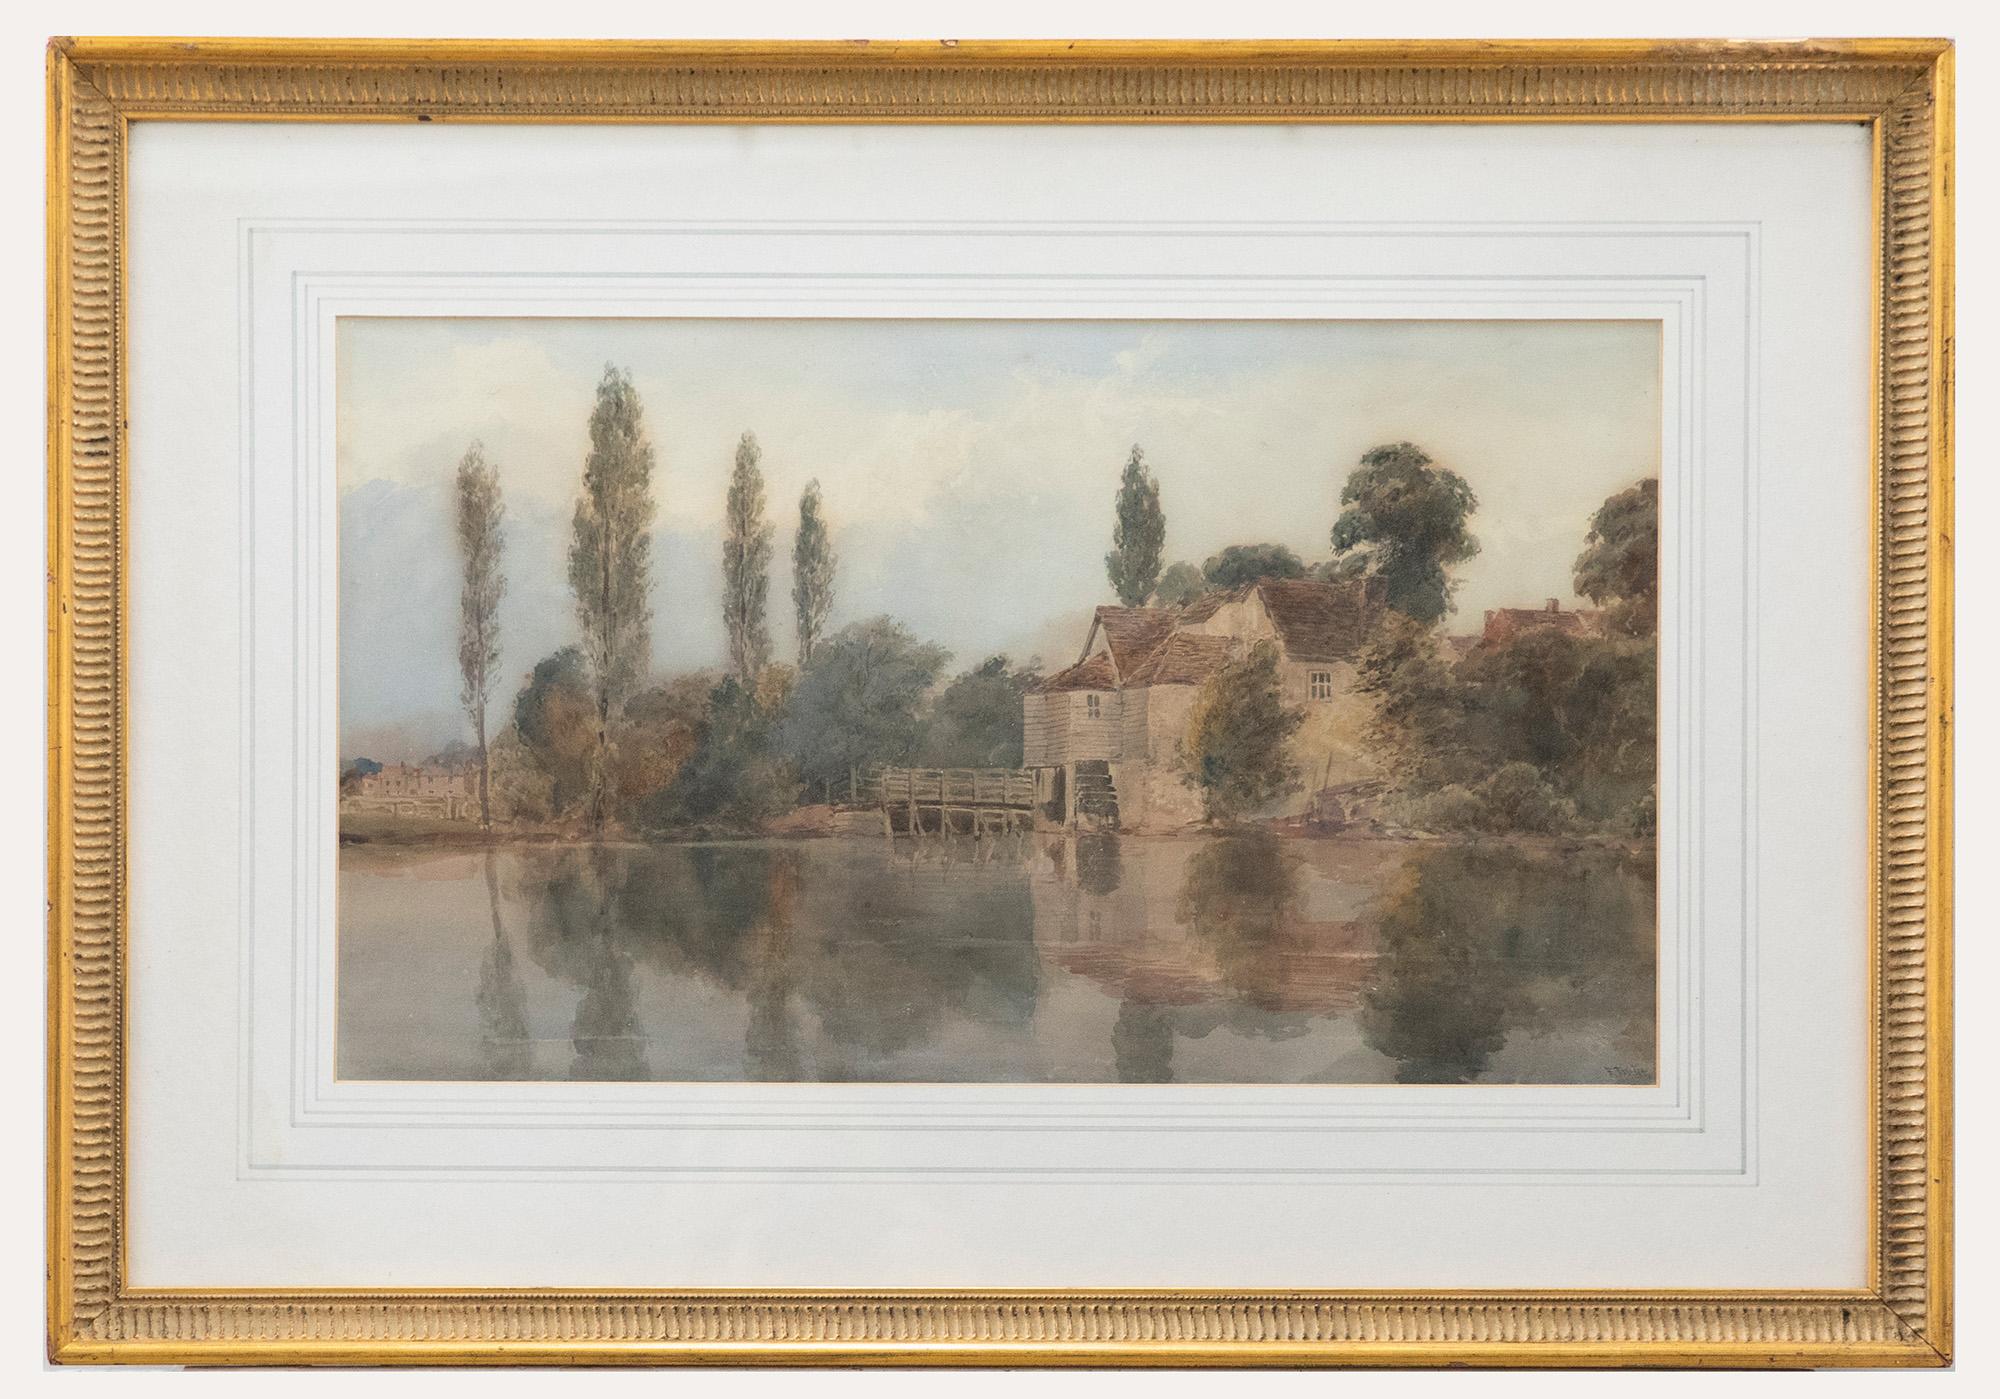 A charming watercolour scene depicting a watermill sat on the verge of a pond. In the distance the houses of a small village can be seen on the horizon. Signed to the lower right. Presented in part gilt frame. On paper.
